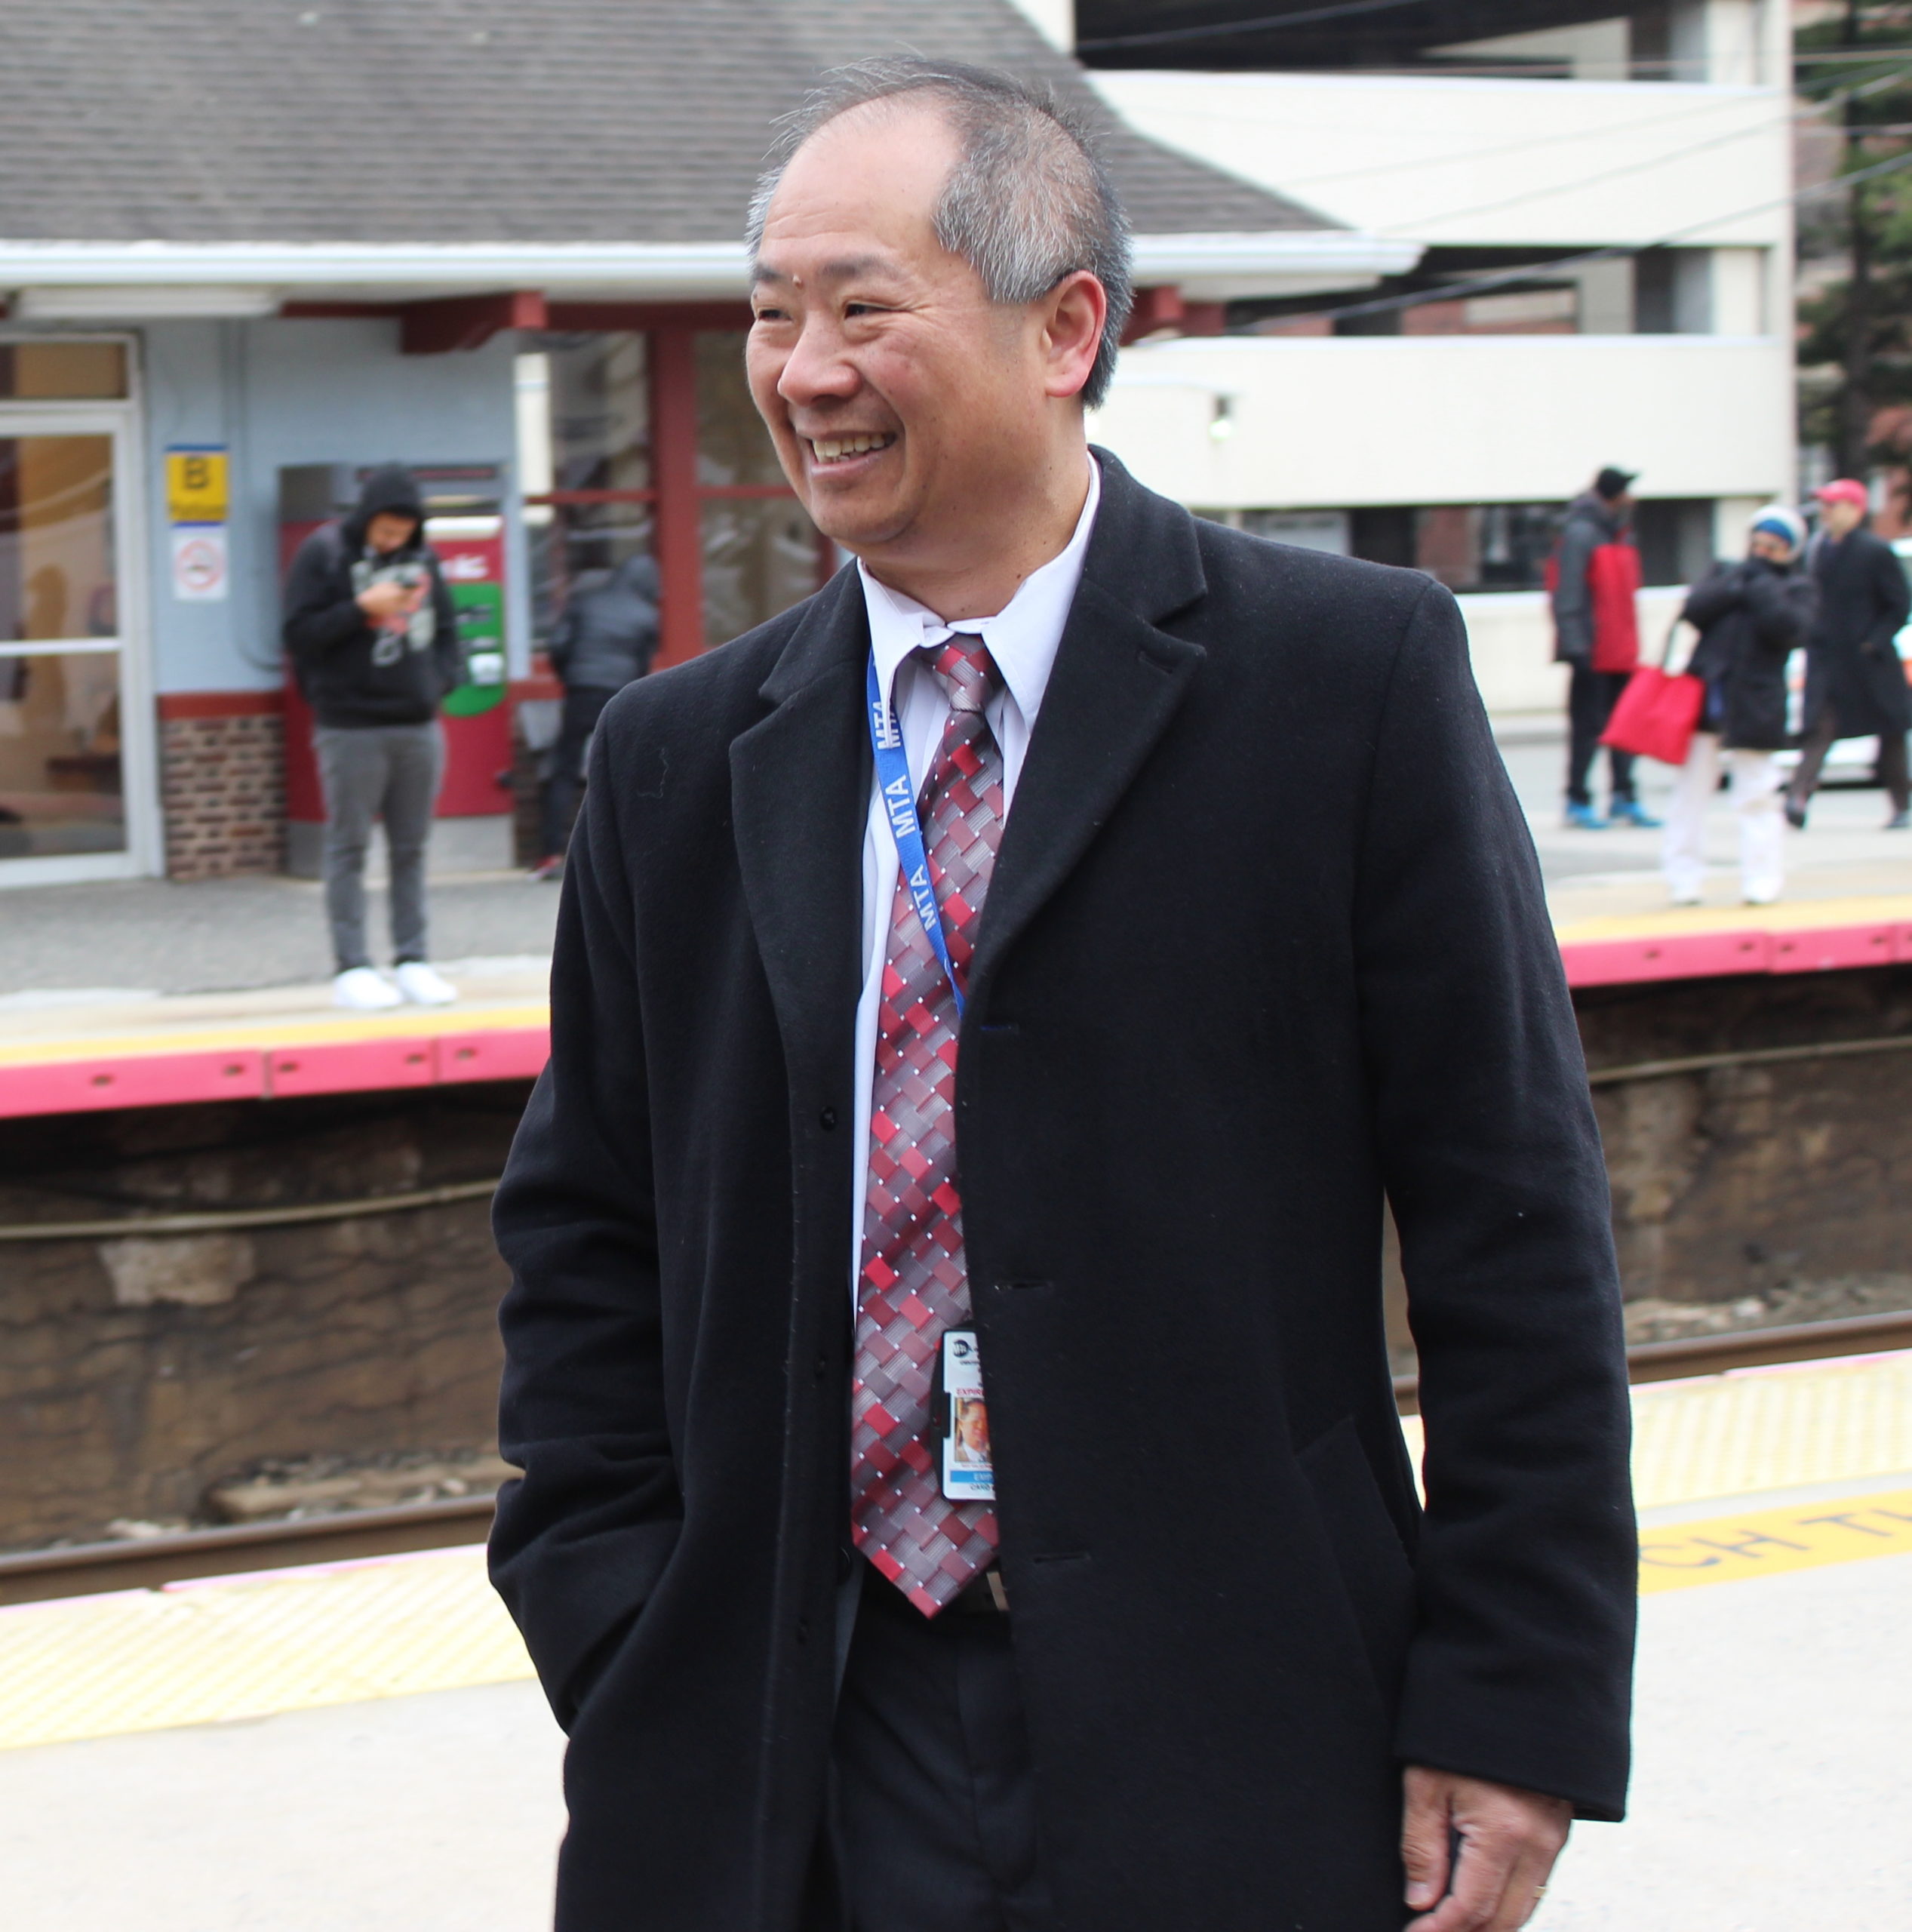 LIRR President Phillip Eng greeting commuters at the Mineola train station. (Photo by Rebecca Klar)